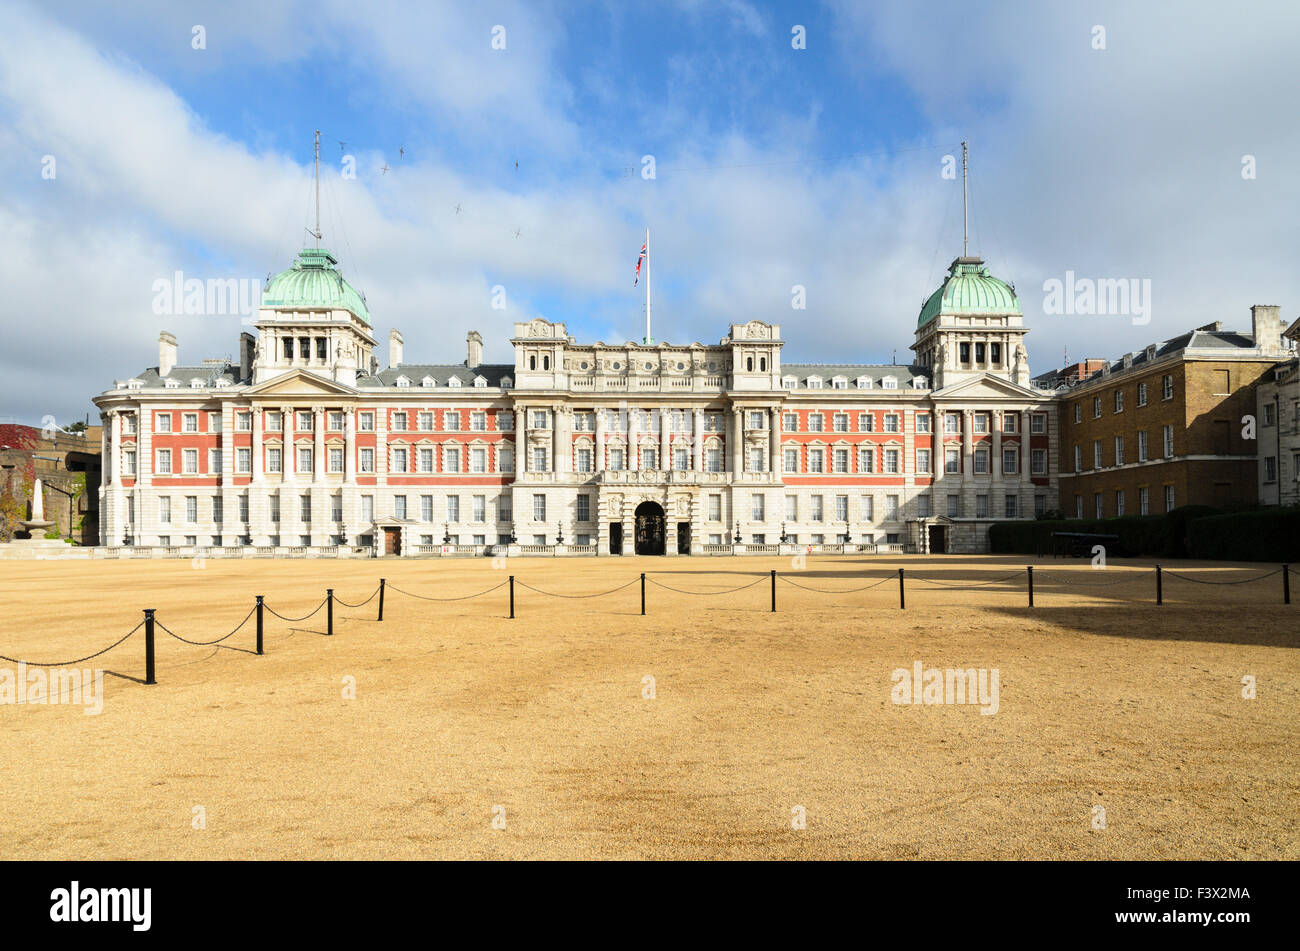 The Admiralty Extension also known as The Old Admiralty Building, Horse Guards Parade, London, England, UK. Stock Photo